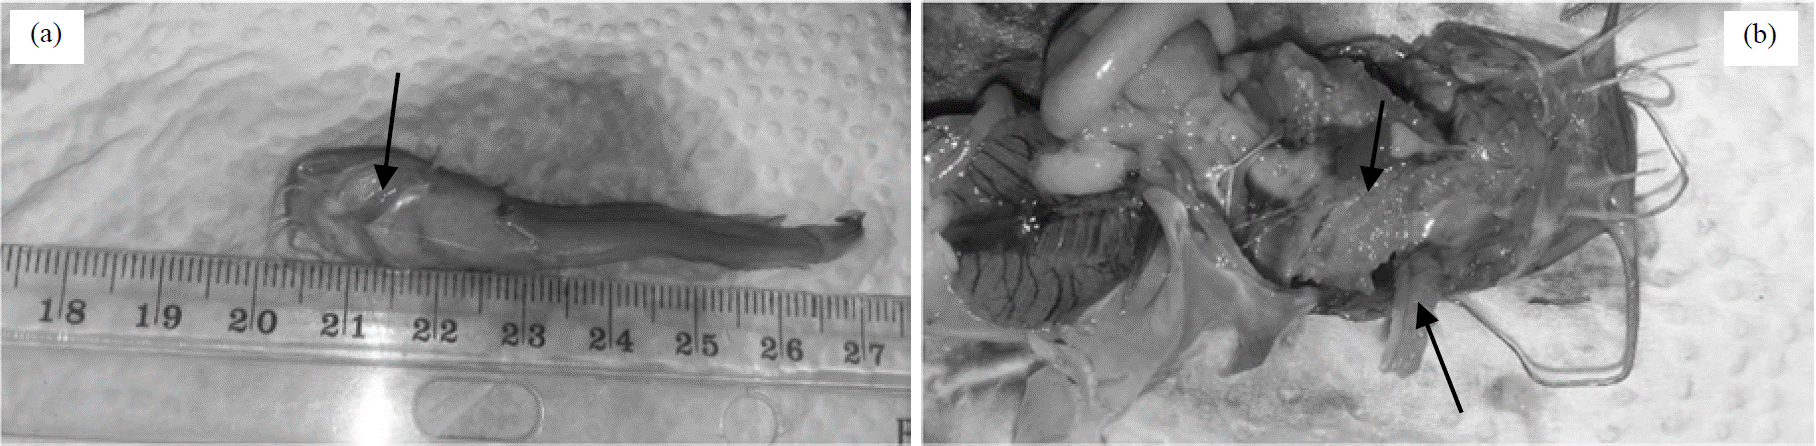 Image for - Severe Metacercarial Invasion of the Gills of Farmed Clariid Catfish Juveniles